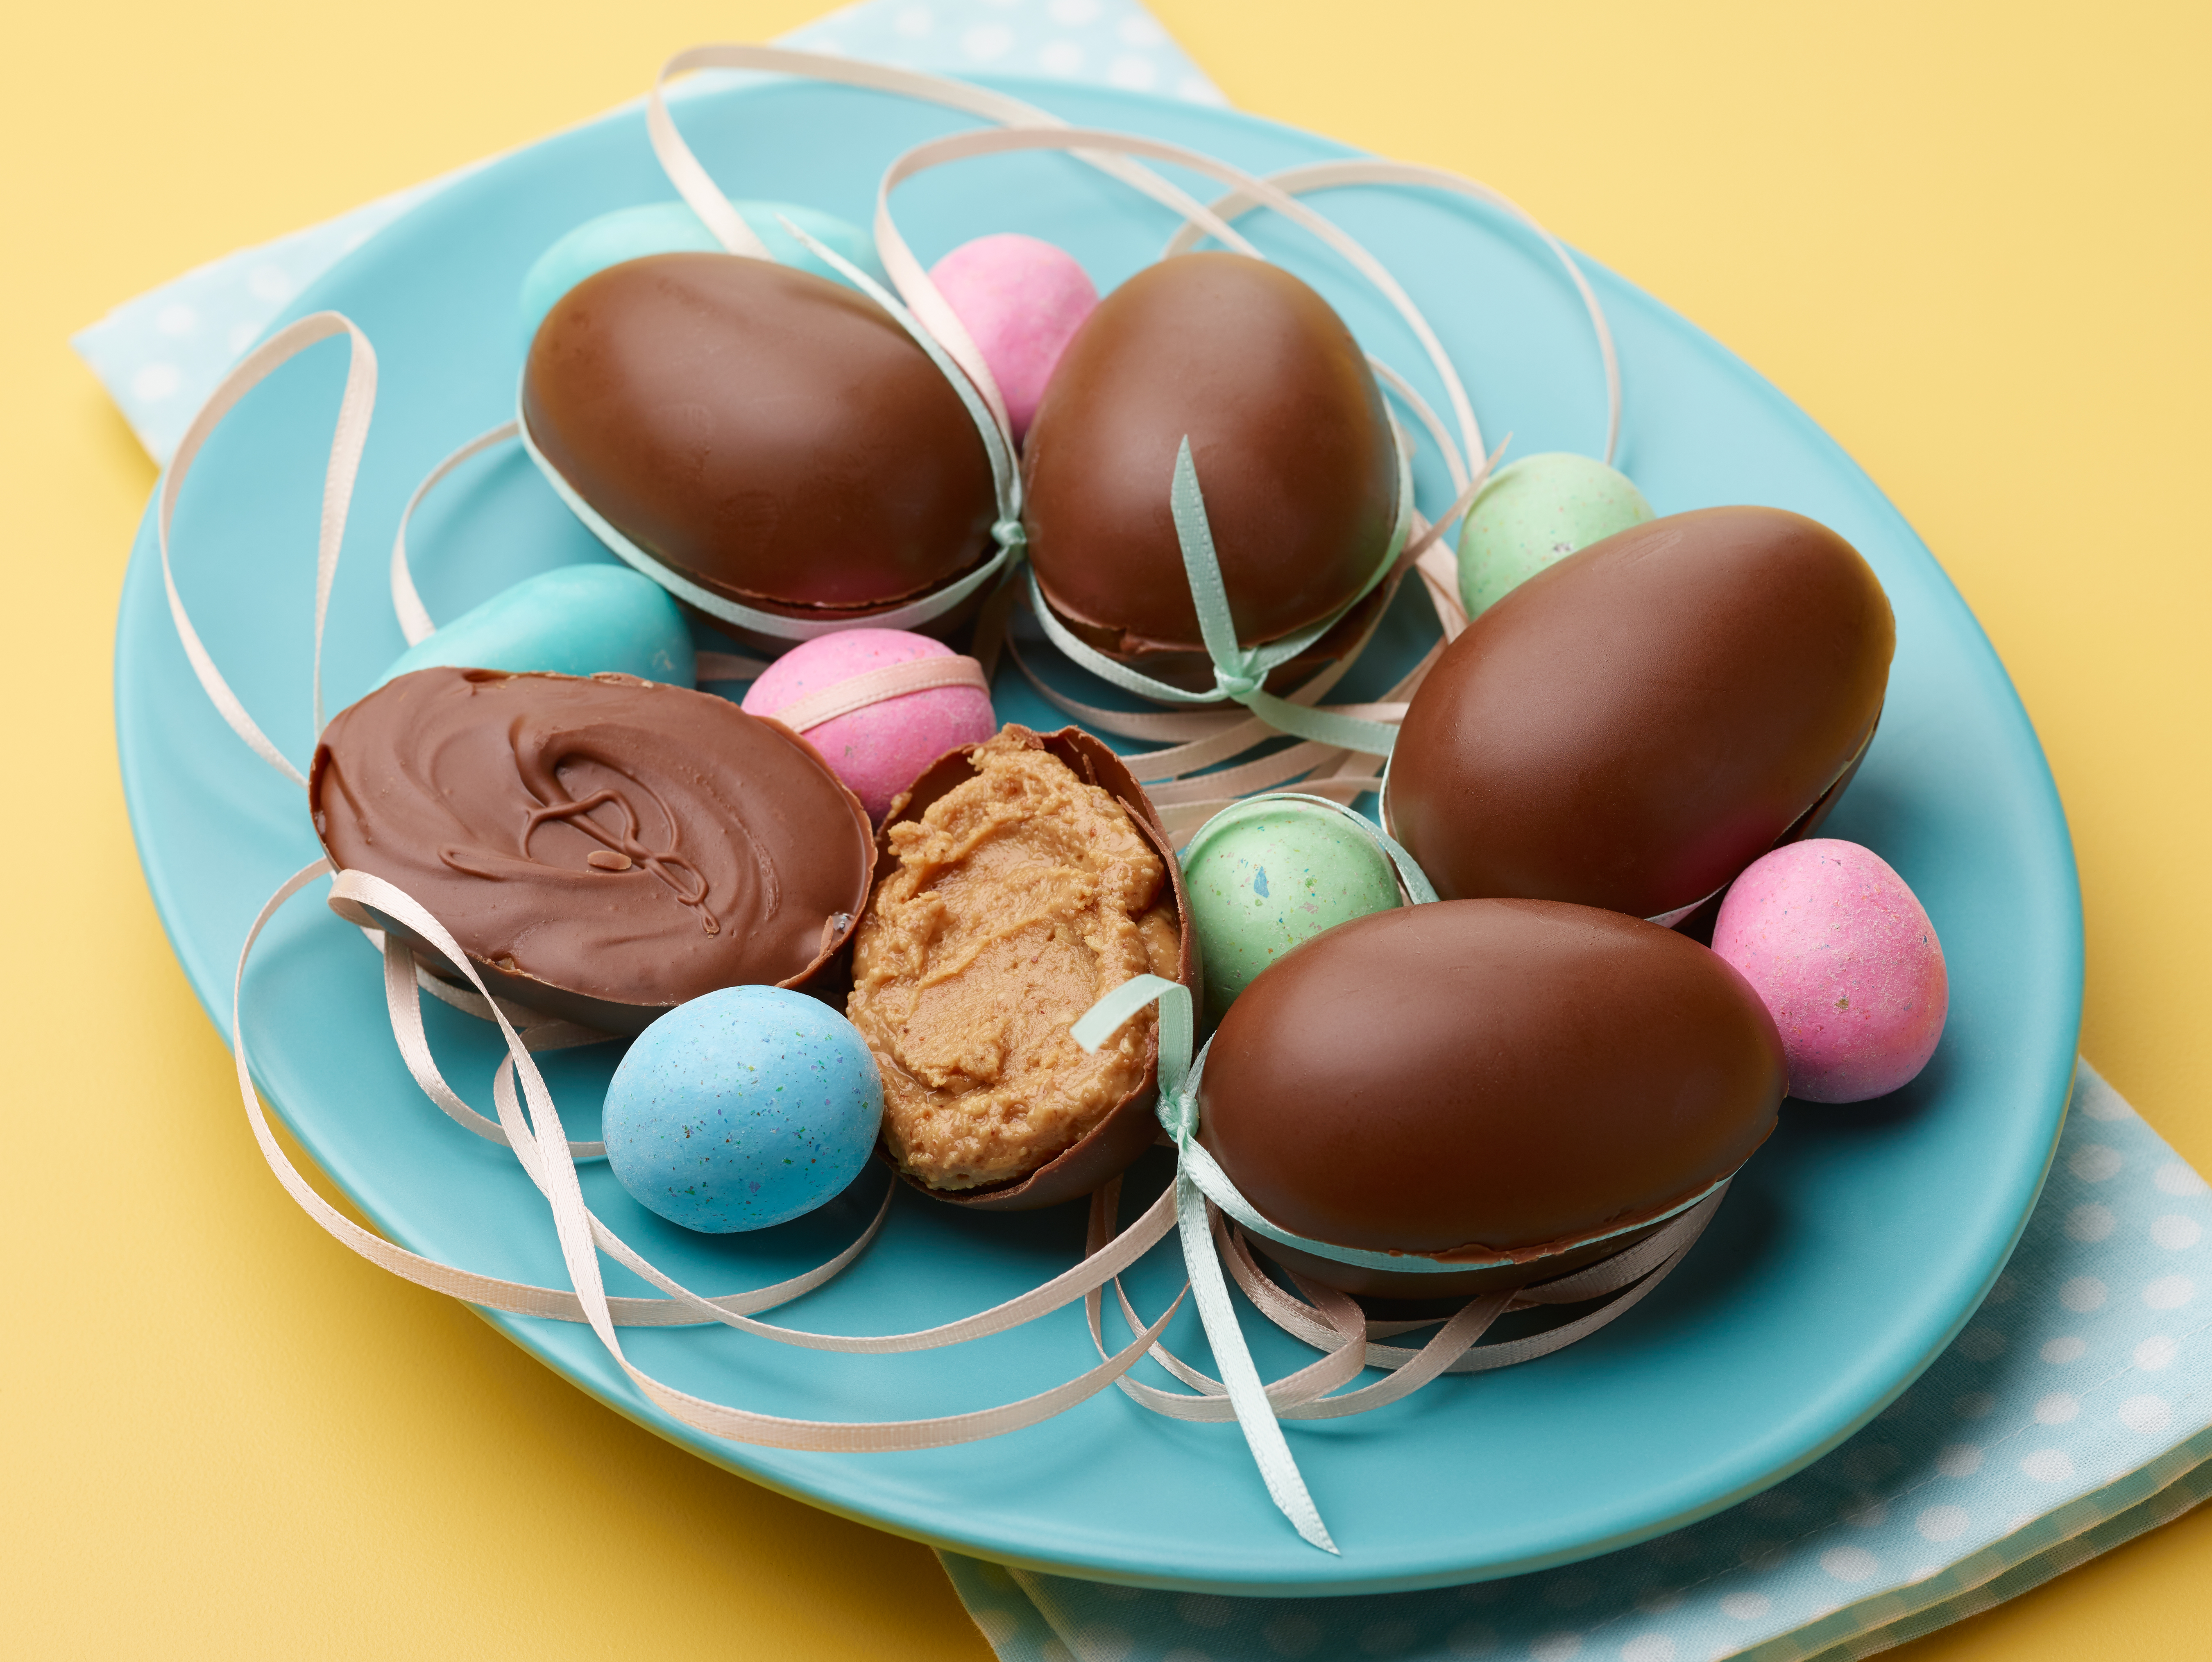 Why do we give chocolate eggs at Easter?